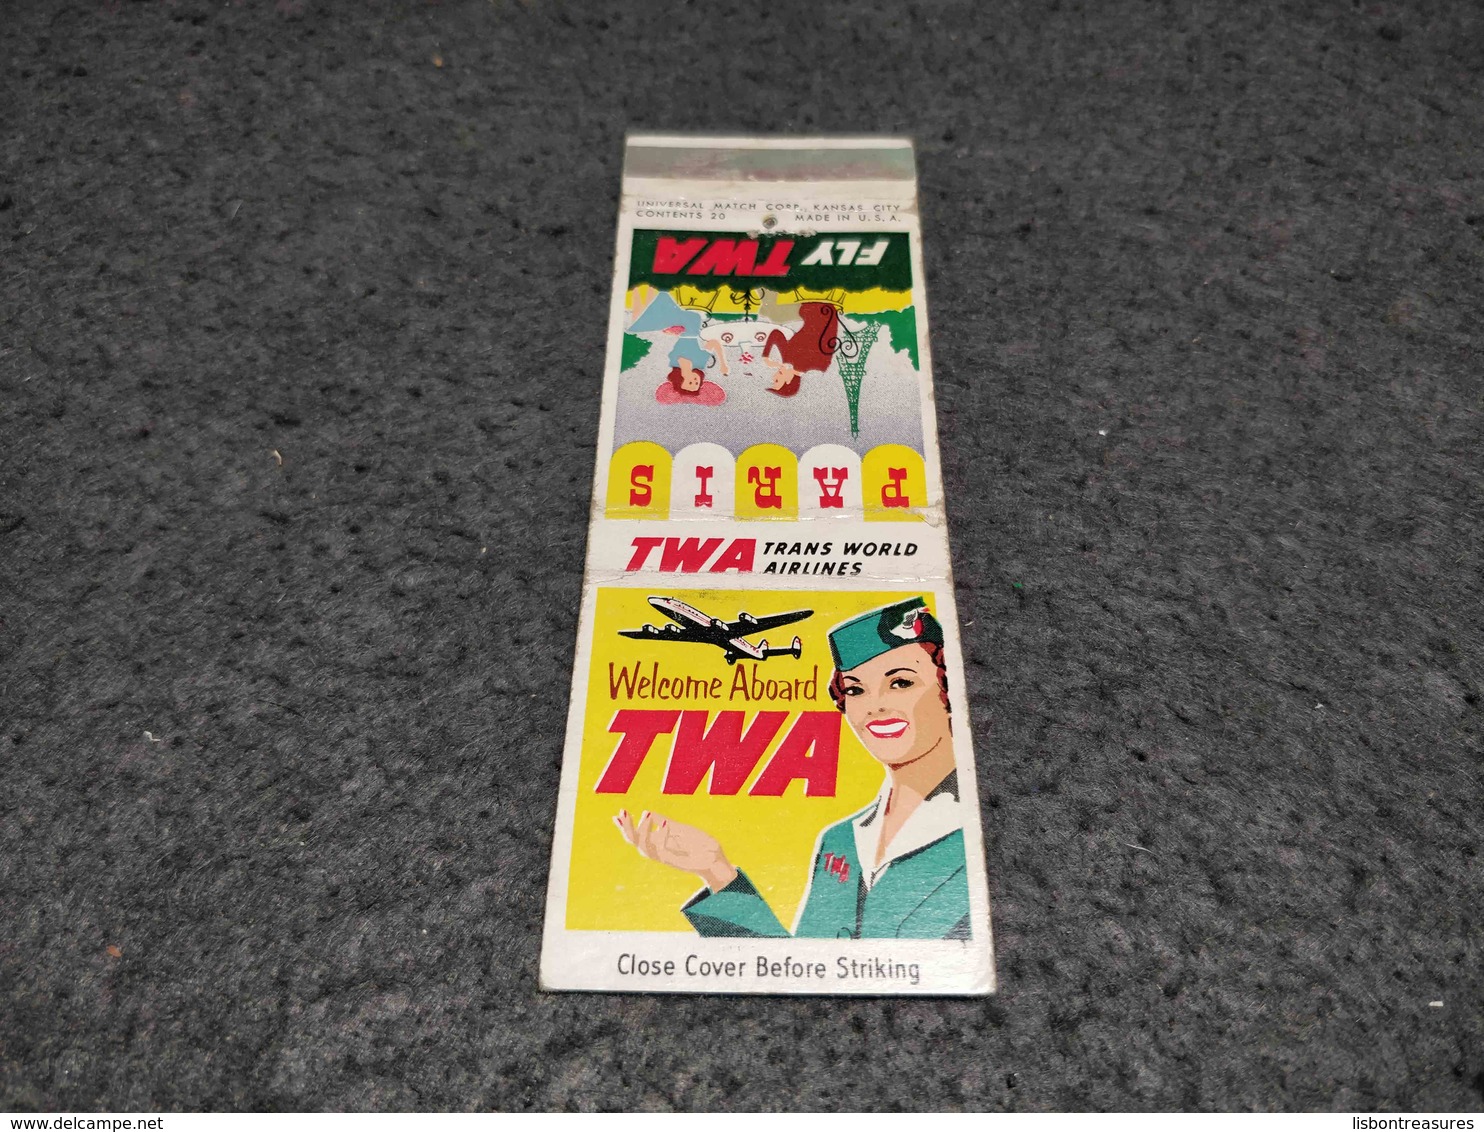 ANTIQUE MATCHBOX MATCHES LABEL ADVERTISING TWA AIRLINES  UNITED STATES - Matchboxes